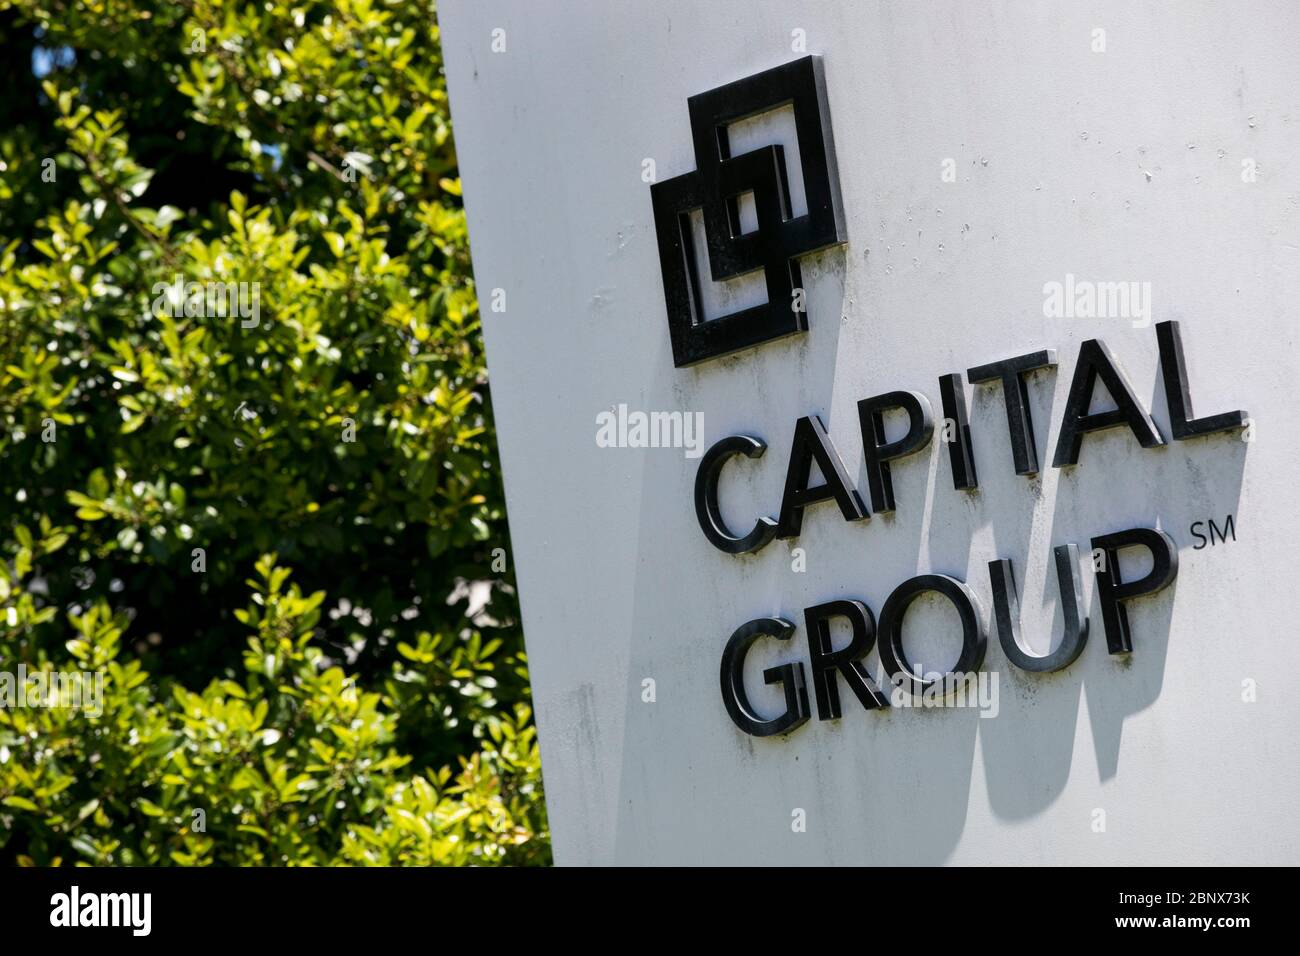 A logo sign outside of a facility occupied by Capital Group in Virginia Beach, Virginia on May 2, 2020. Stock Photo